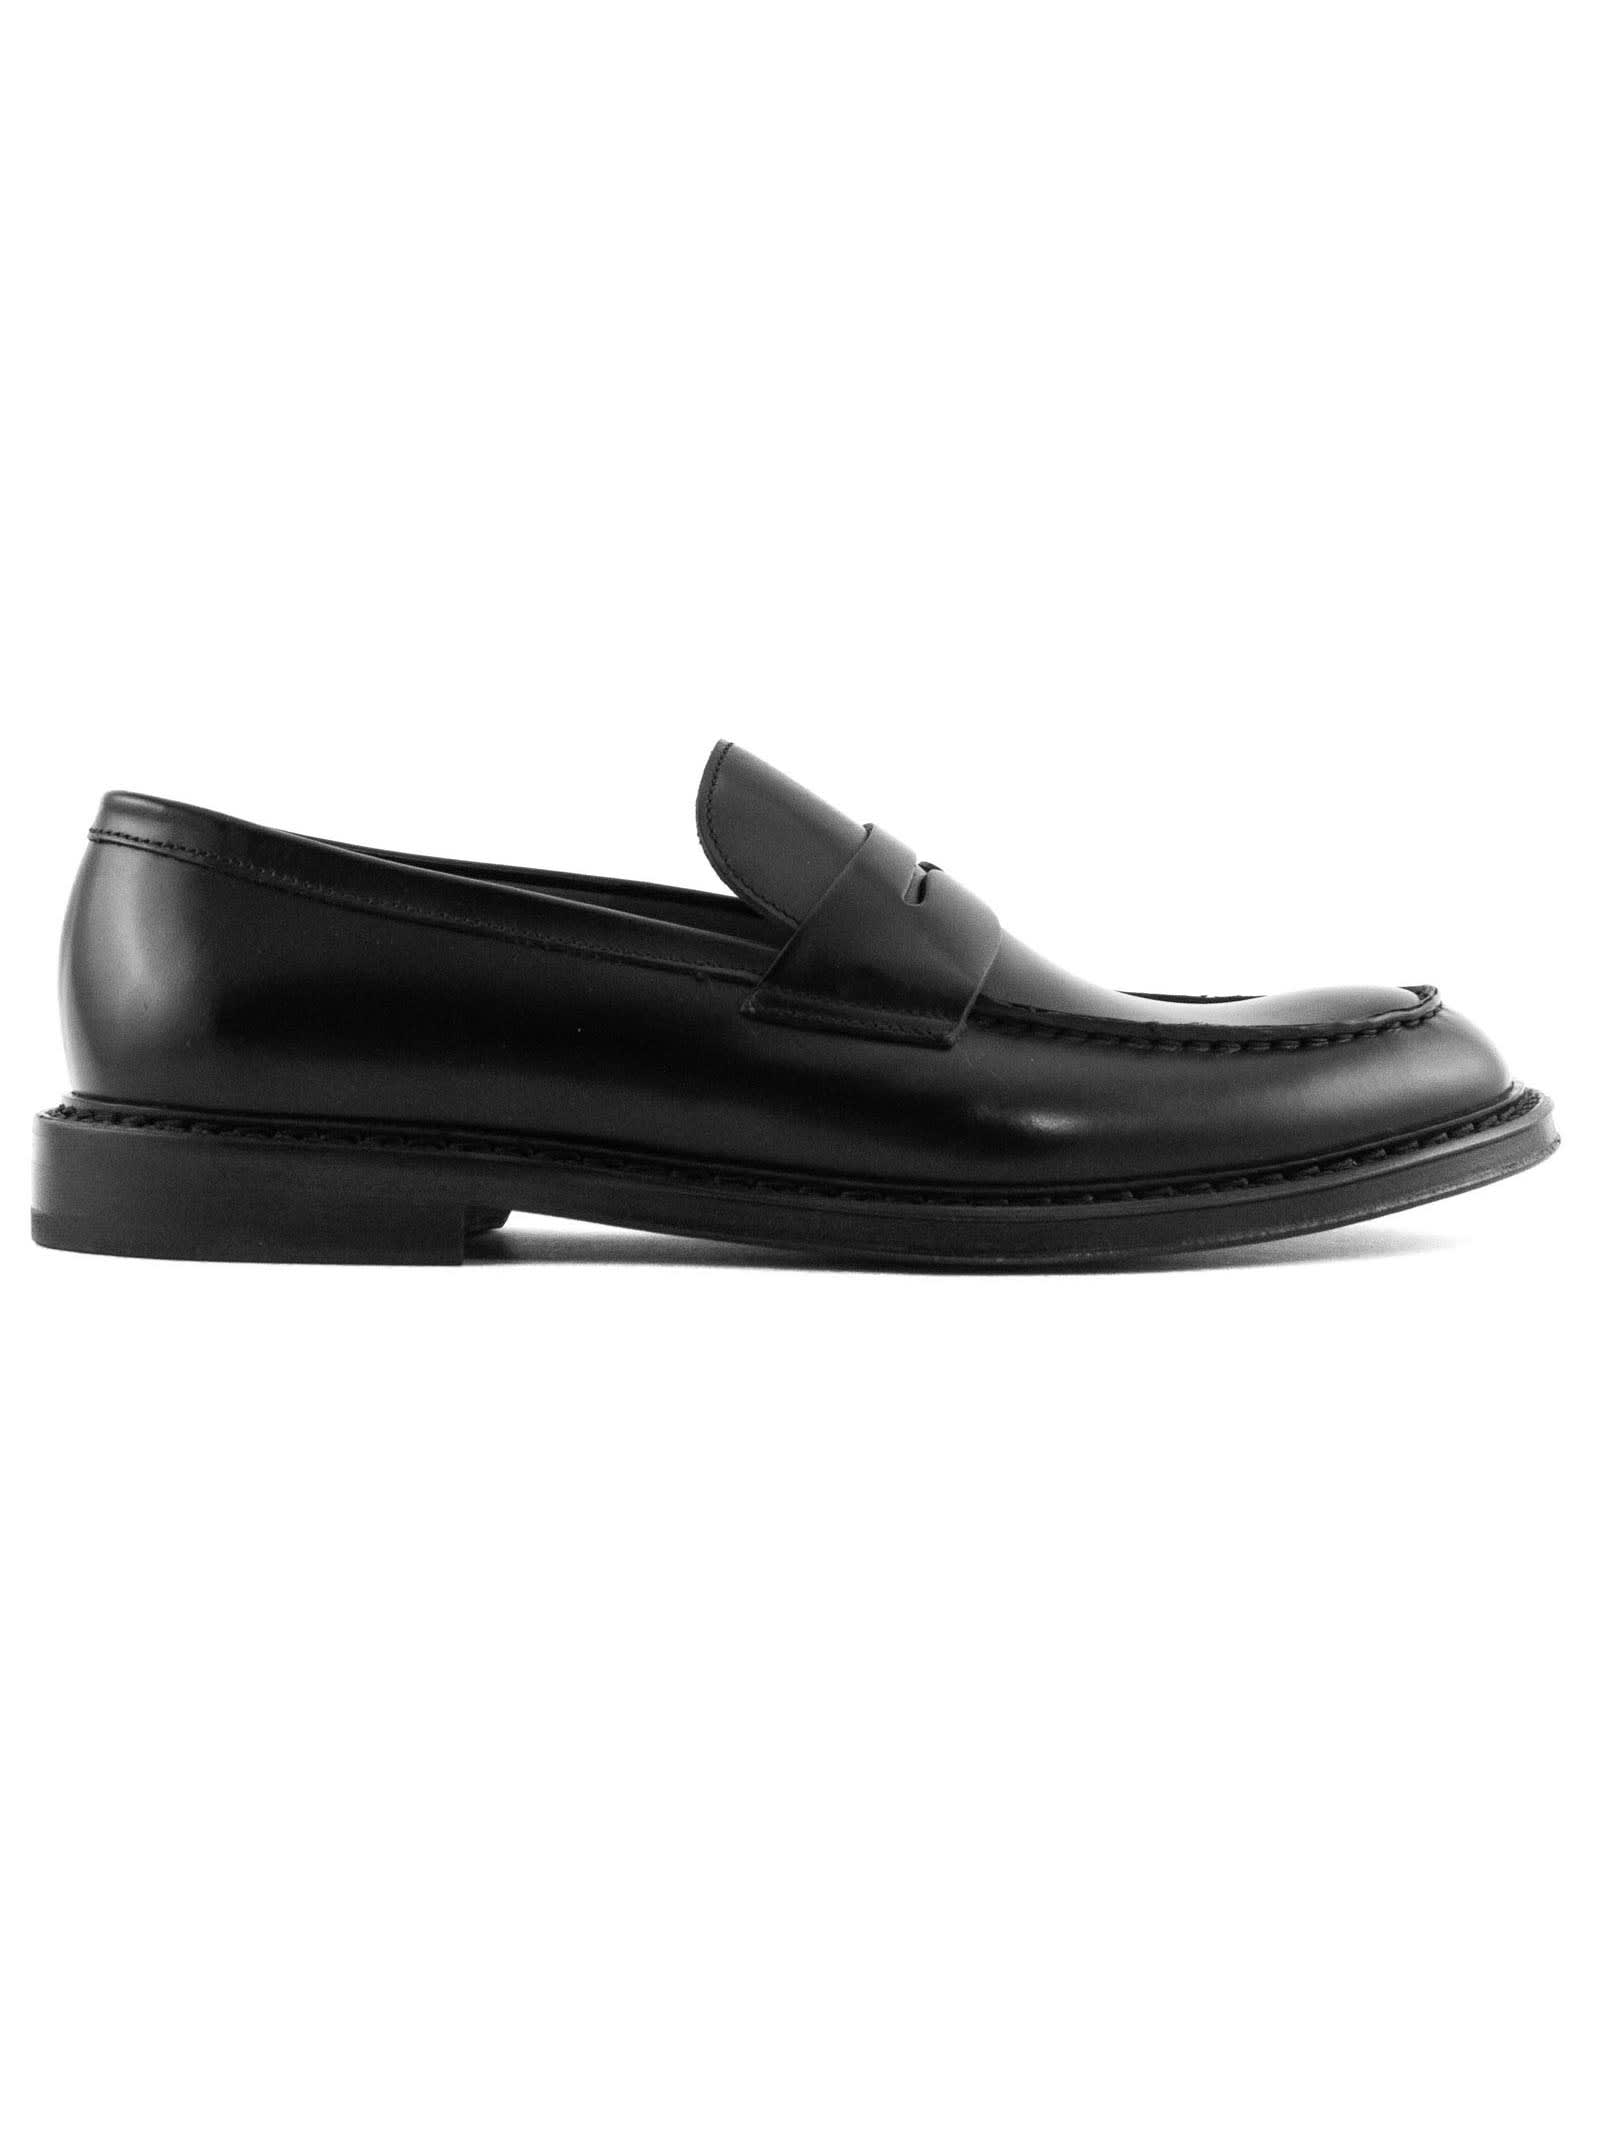 Doucal's Black Smooth Calfskin Leather Penny Loafers